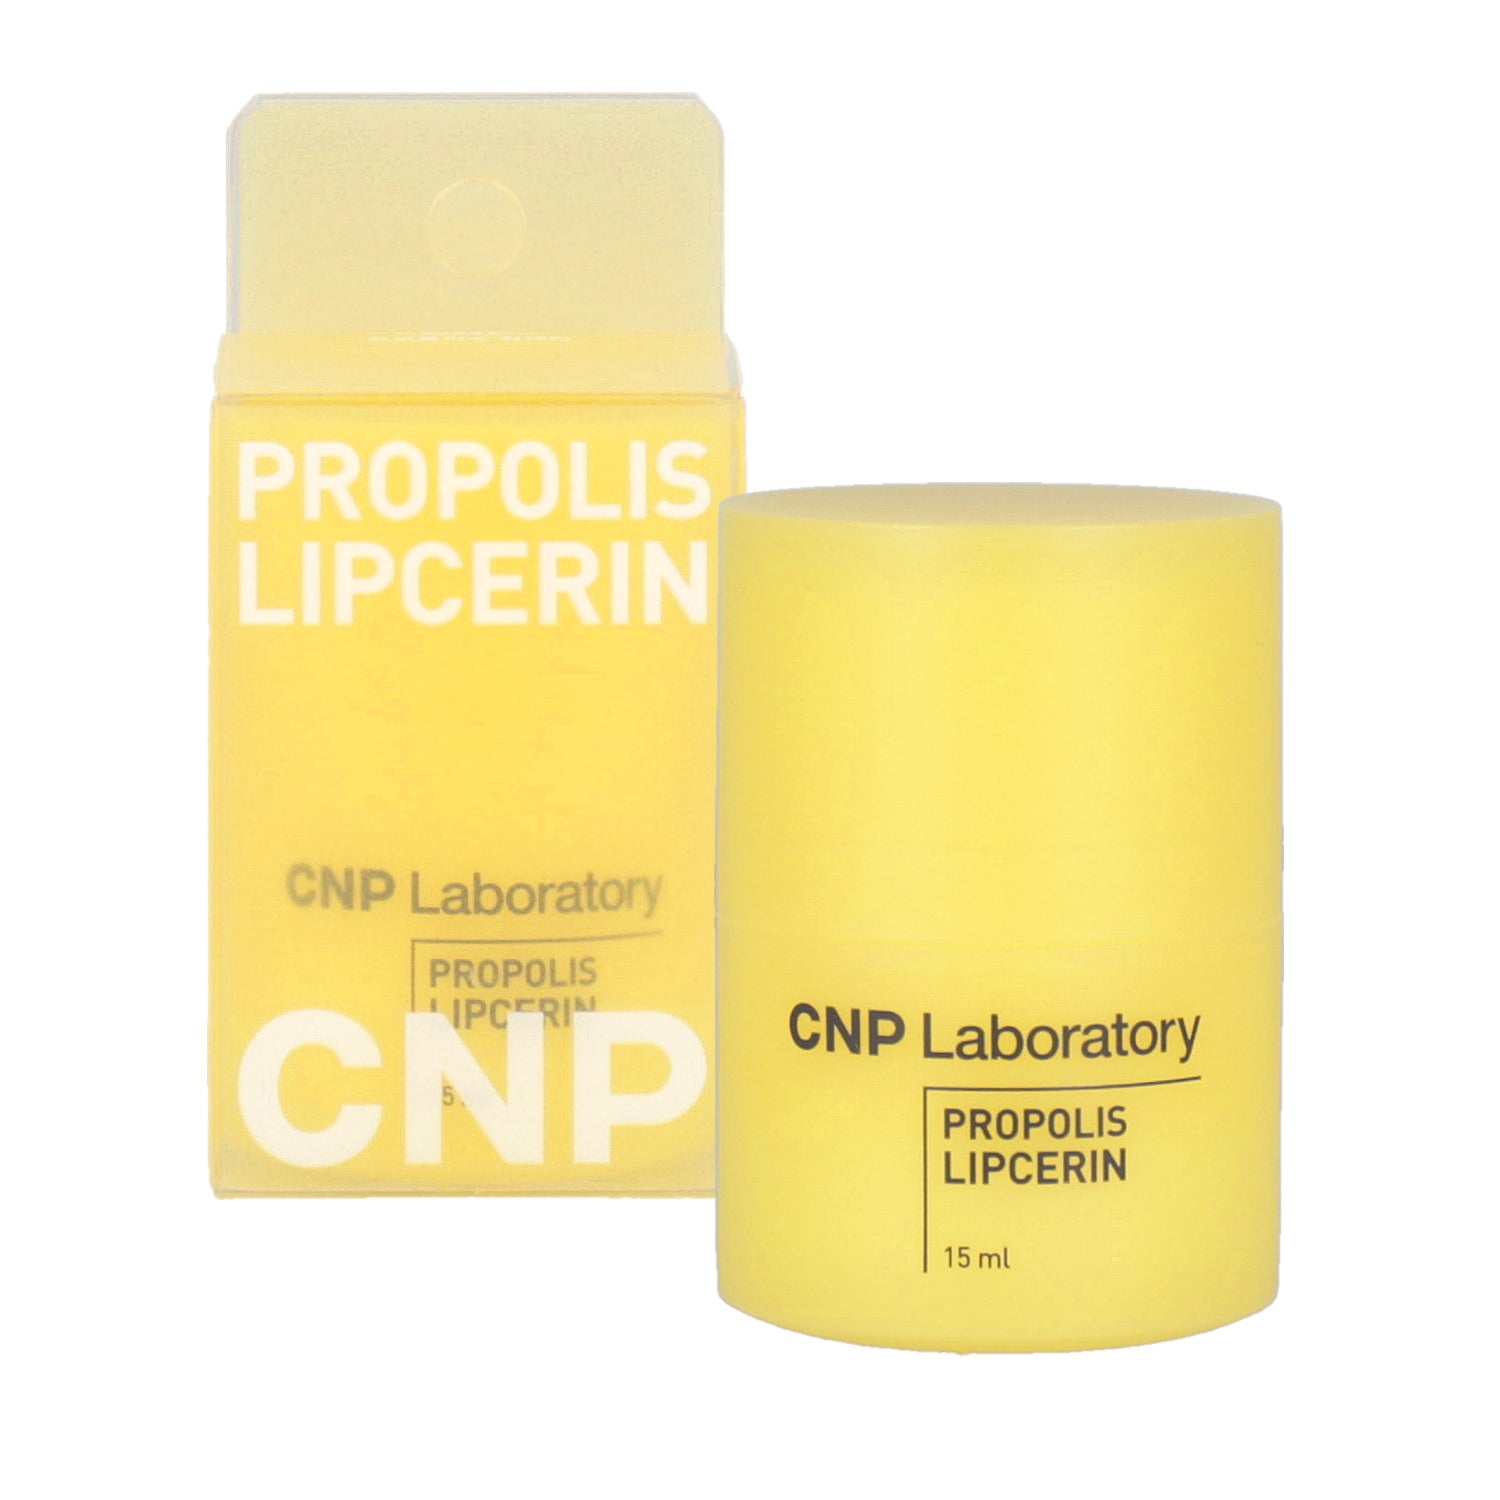 A 15ml bottle of CNP Laboratory Propolis Lipcerin, a lip care product made with propolis extract for moisturizing and nourishing lips.